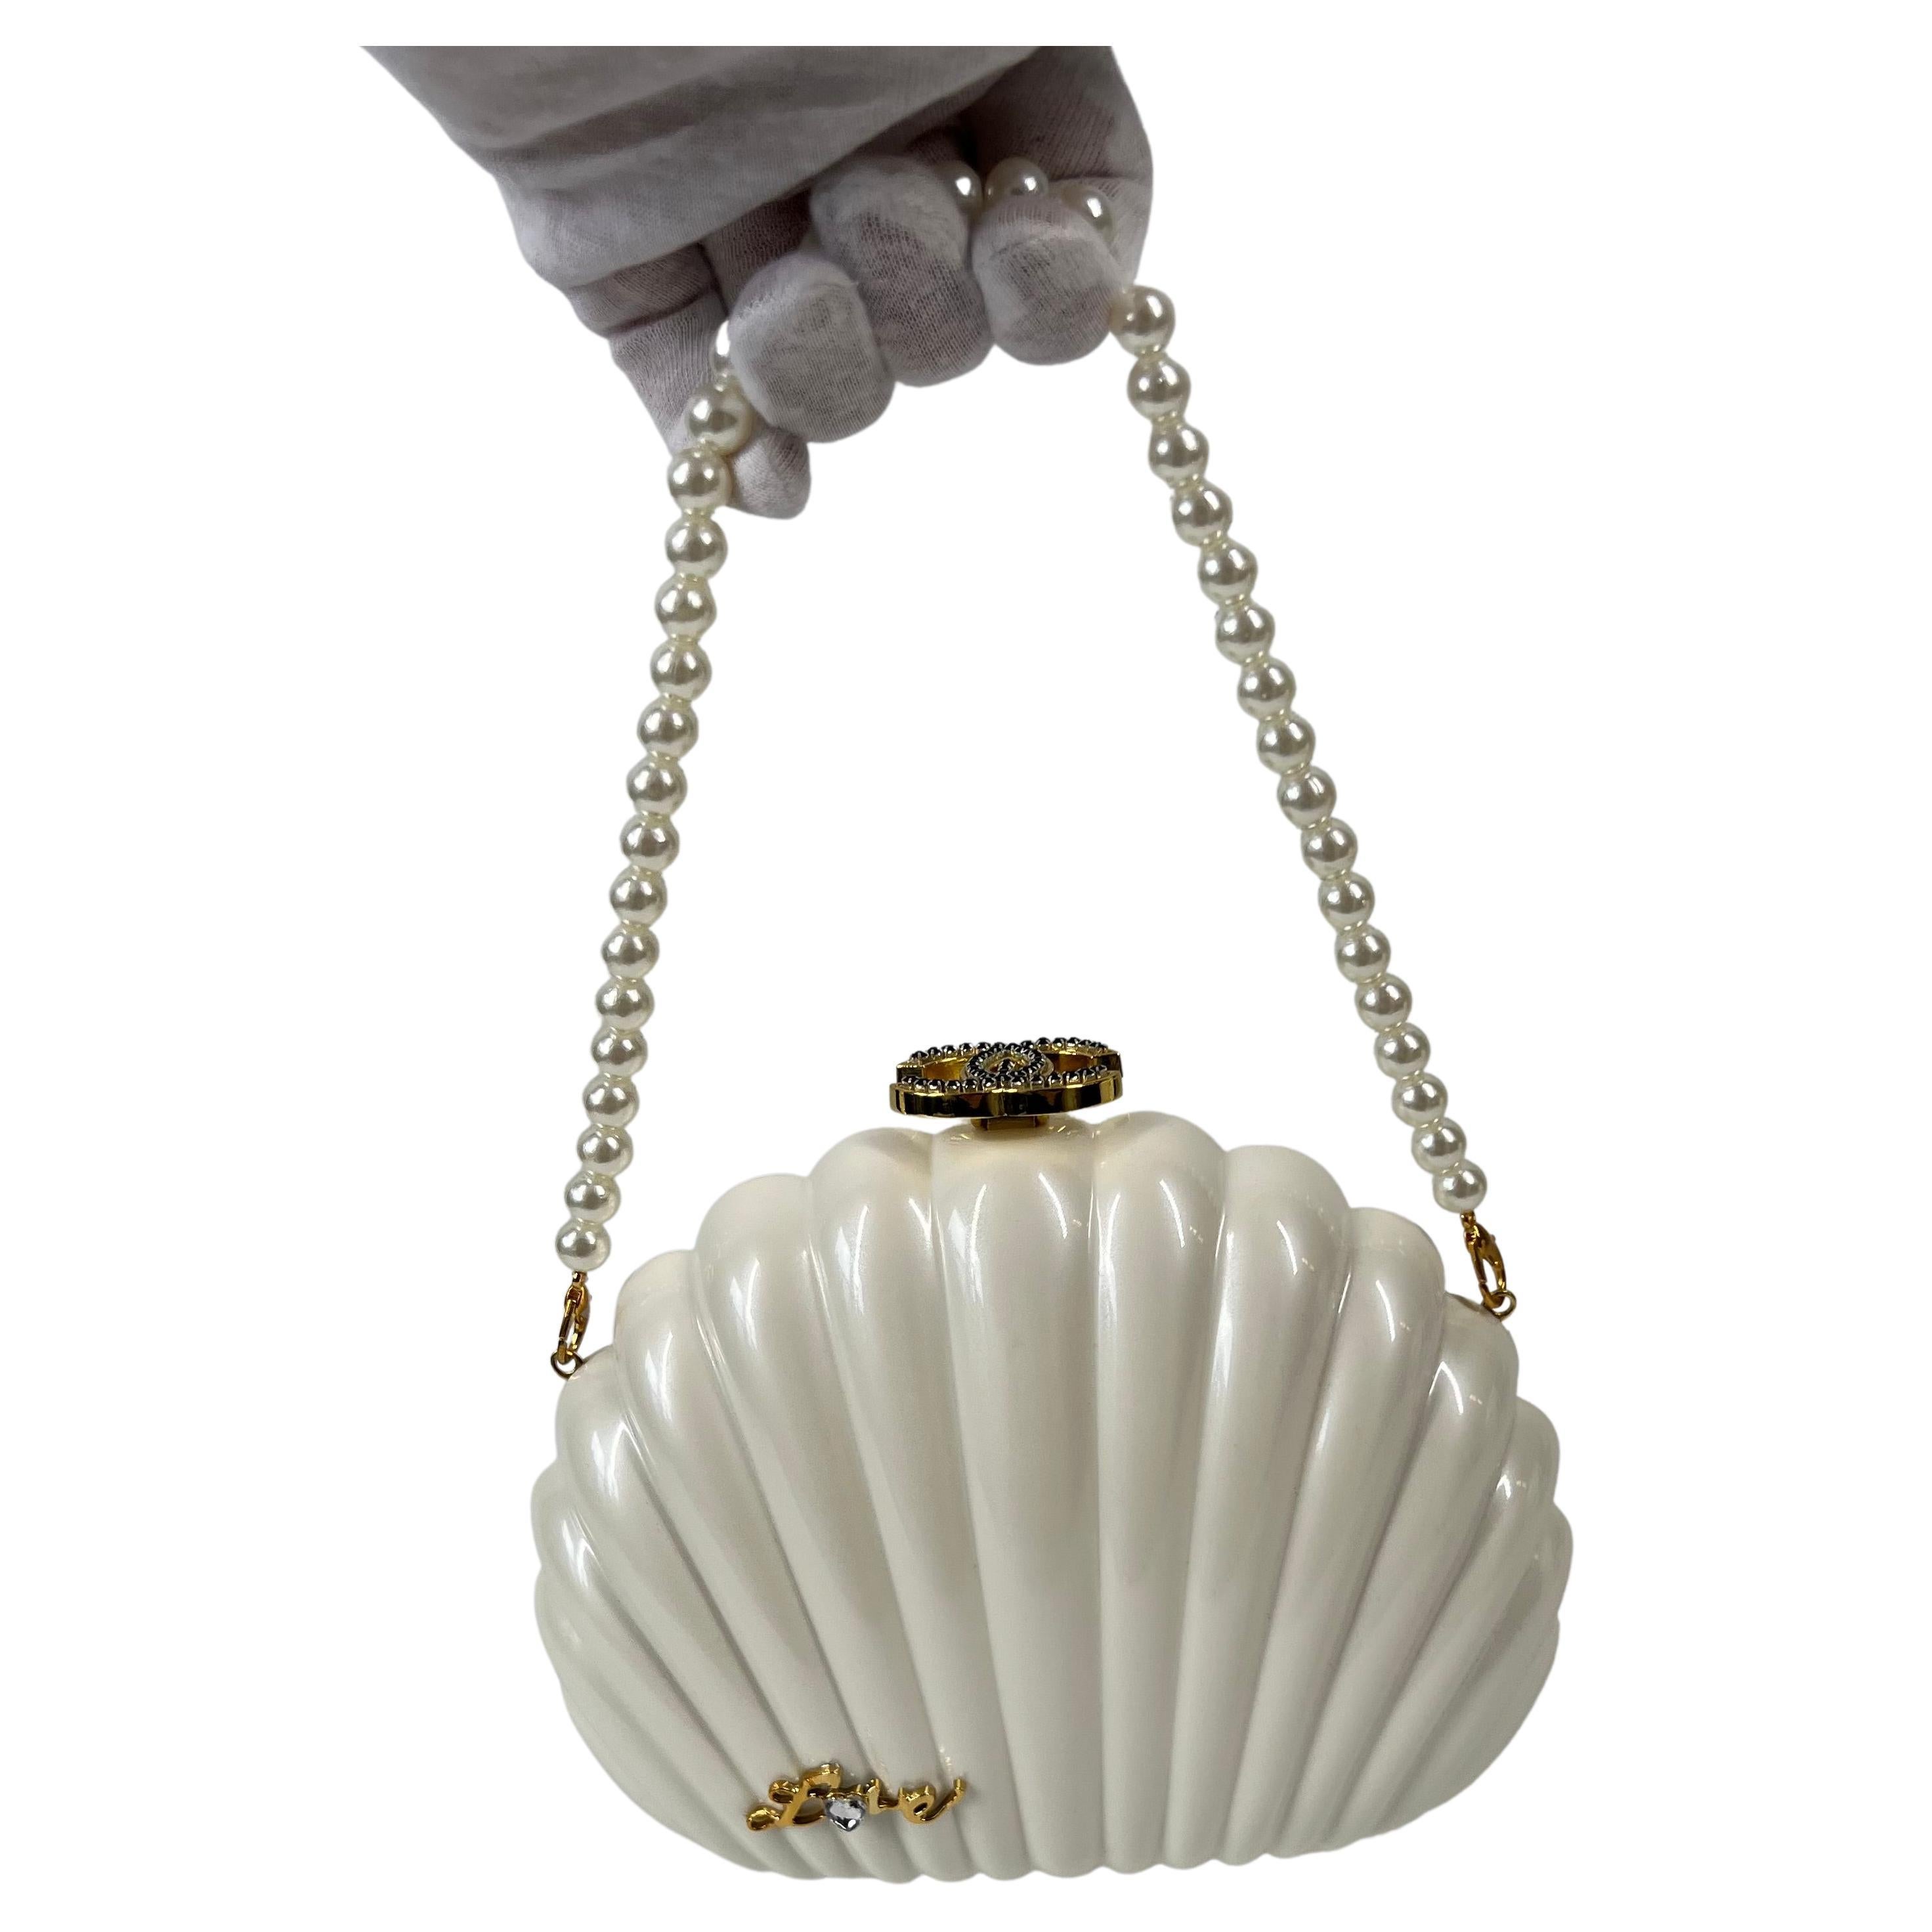 AUTHENTIC HUGE WHITE Cc Chanel Clam Shell Bag Vip Gift Runway Limited  Edition $650.00 - PicClick